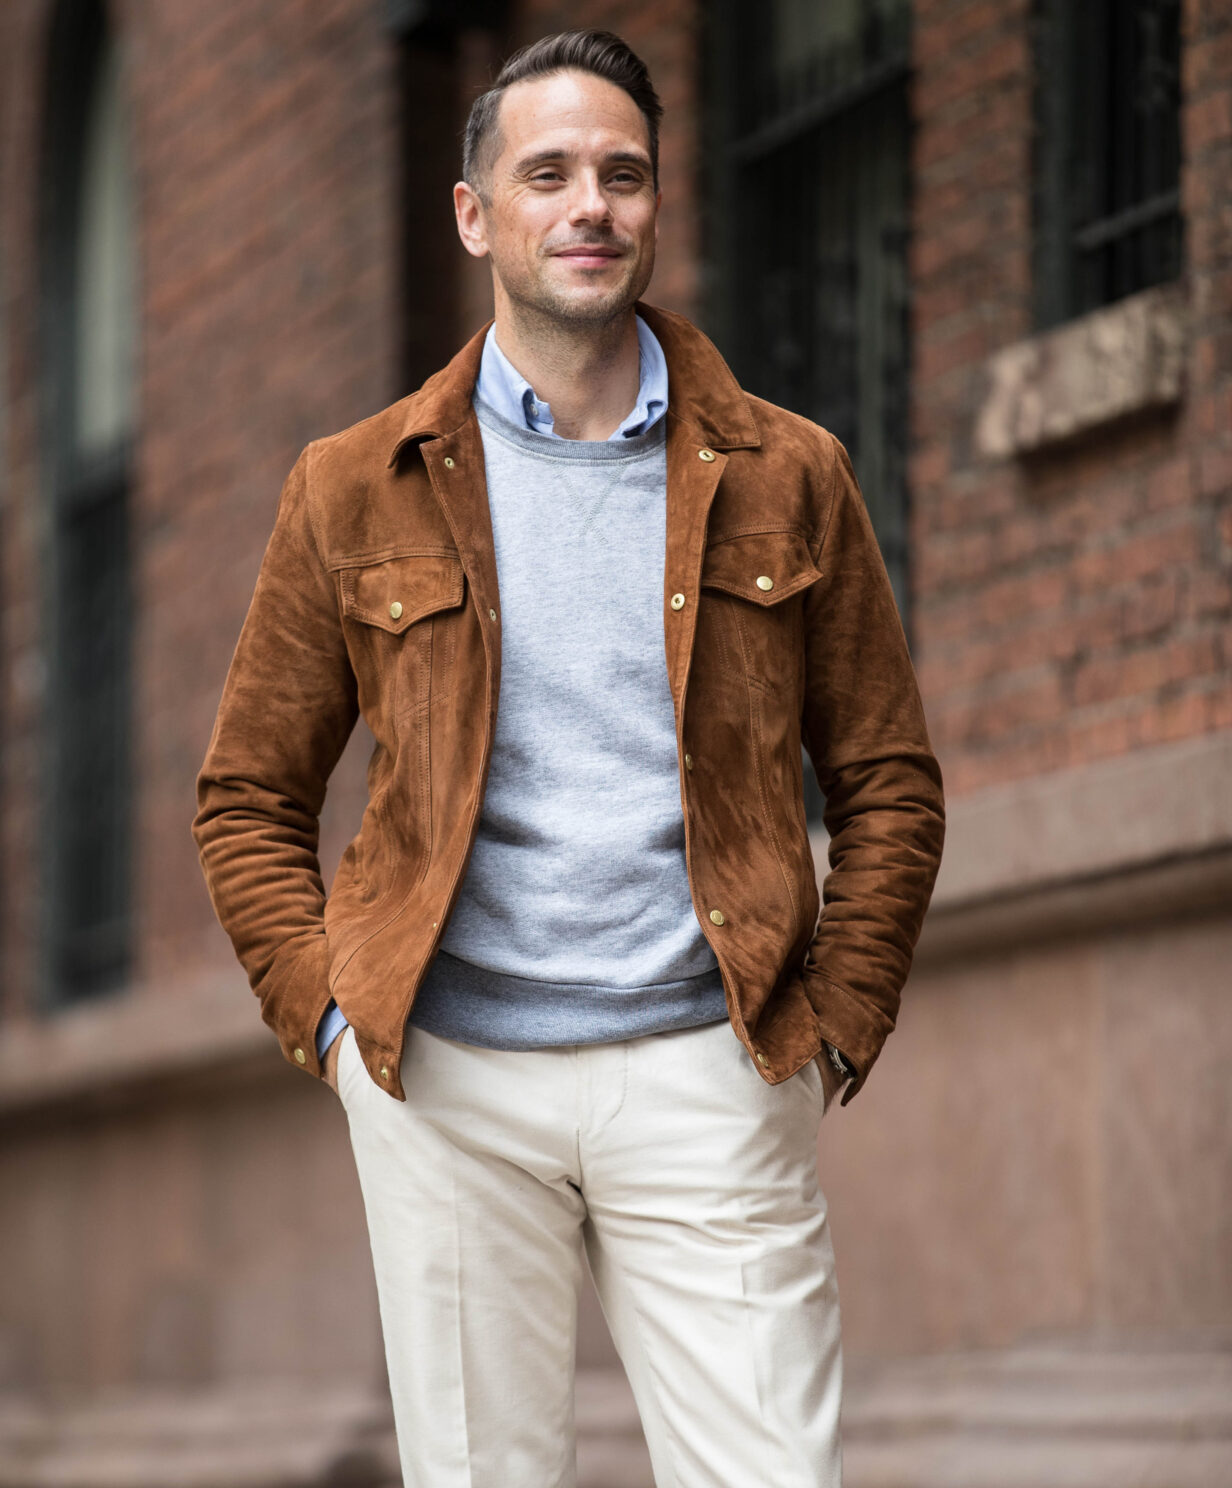 Suede Trucker Jacket with Sweatshirt and Chinos